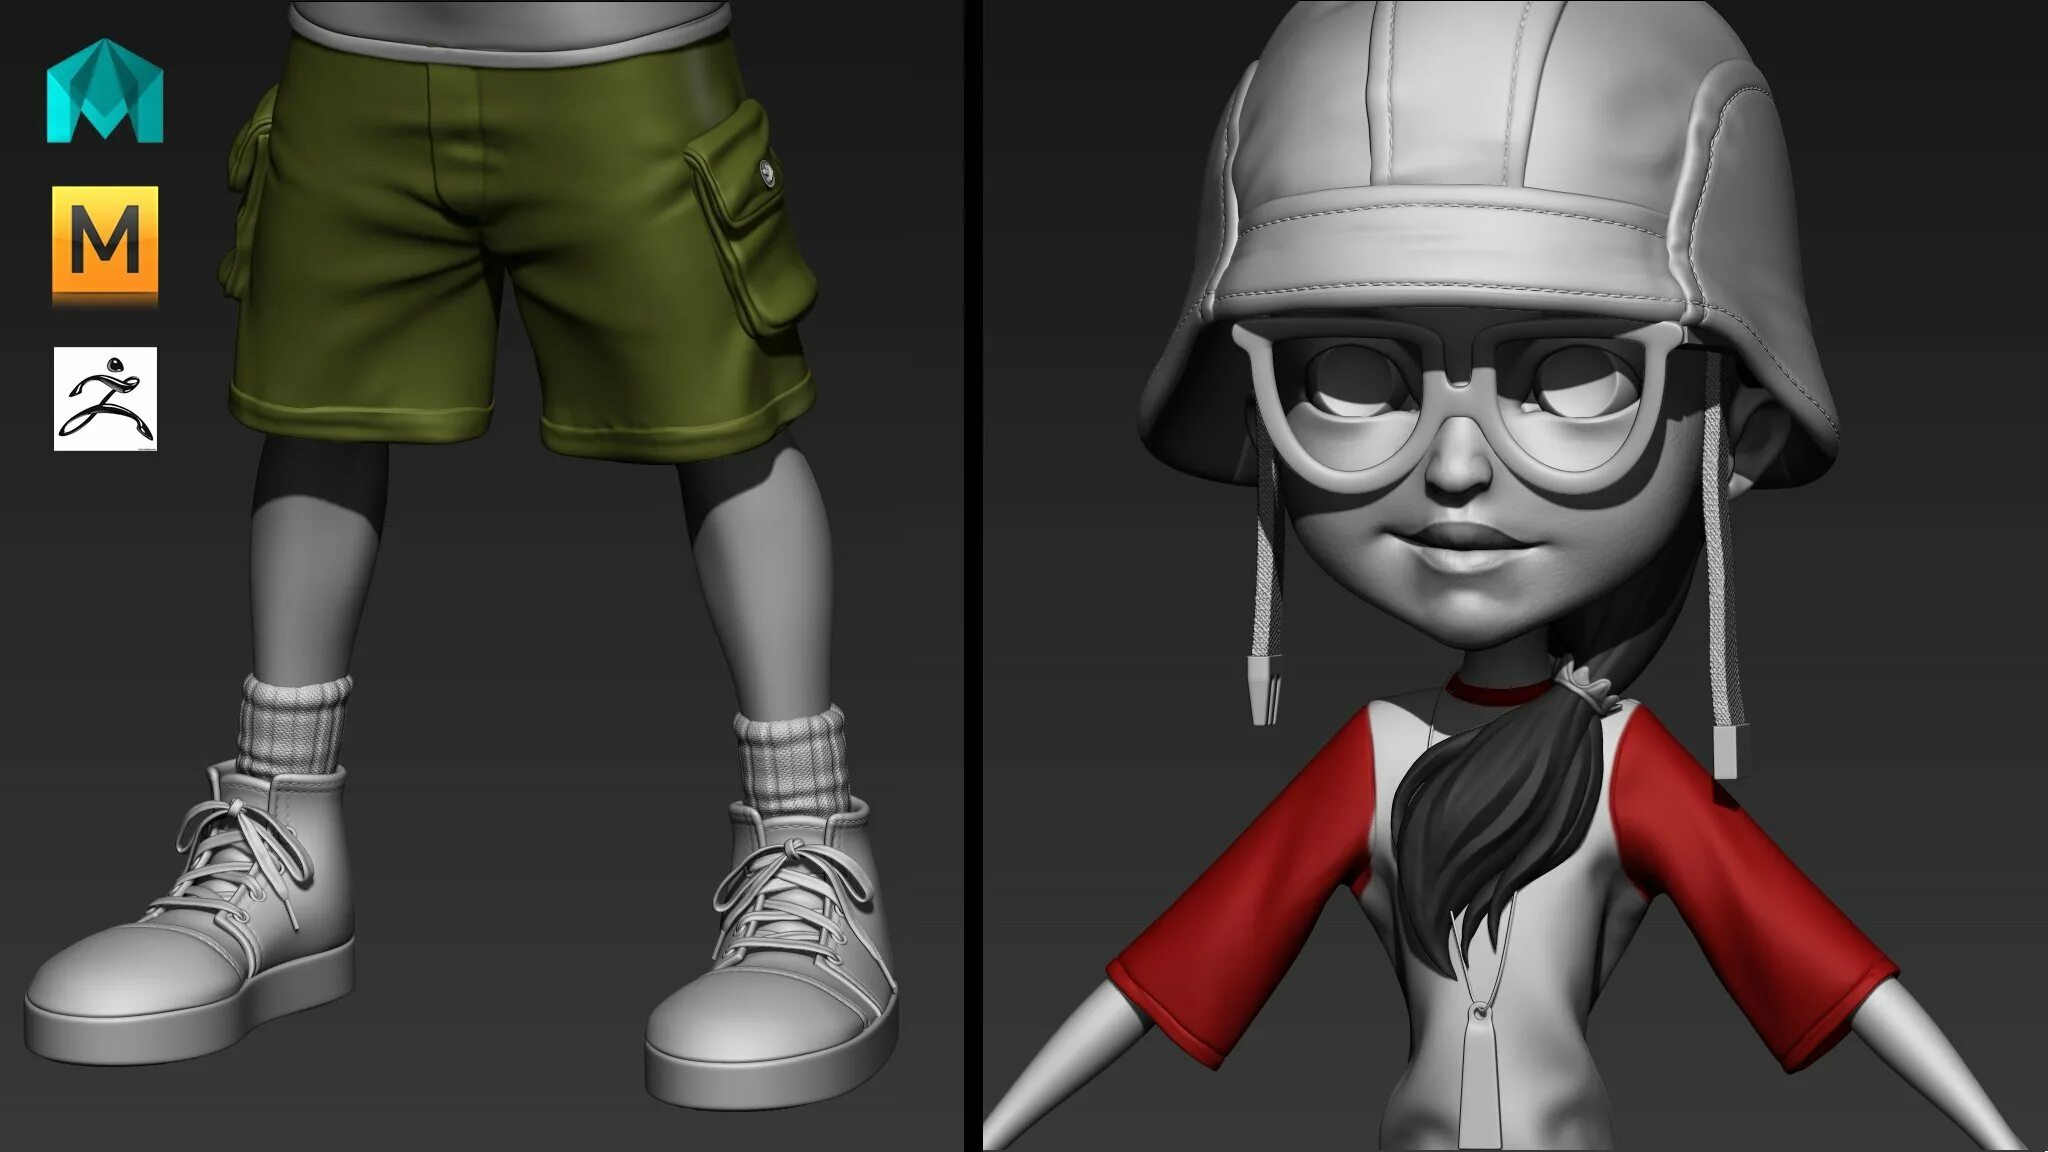 Zbrush игры. Кло 3д аватар. Zbrush game character. Zbrush character course. Made your character